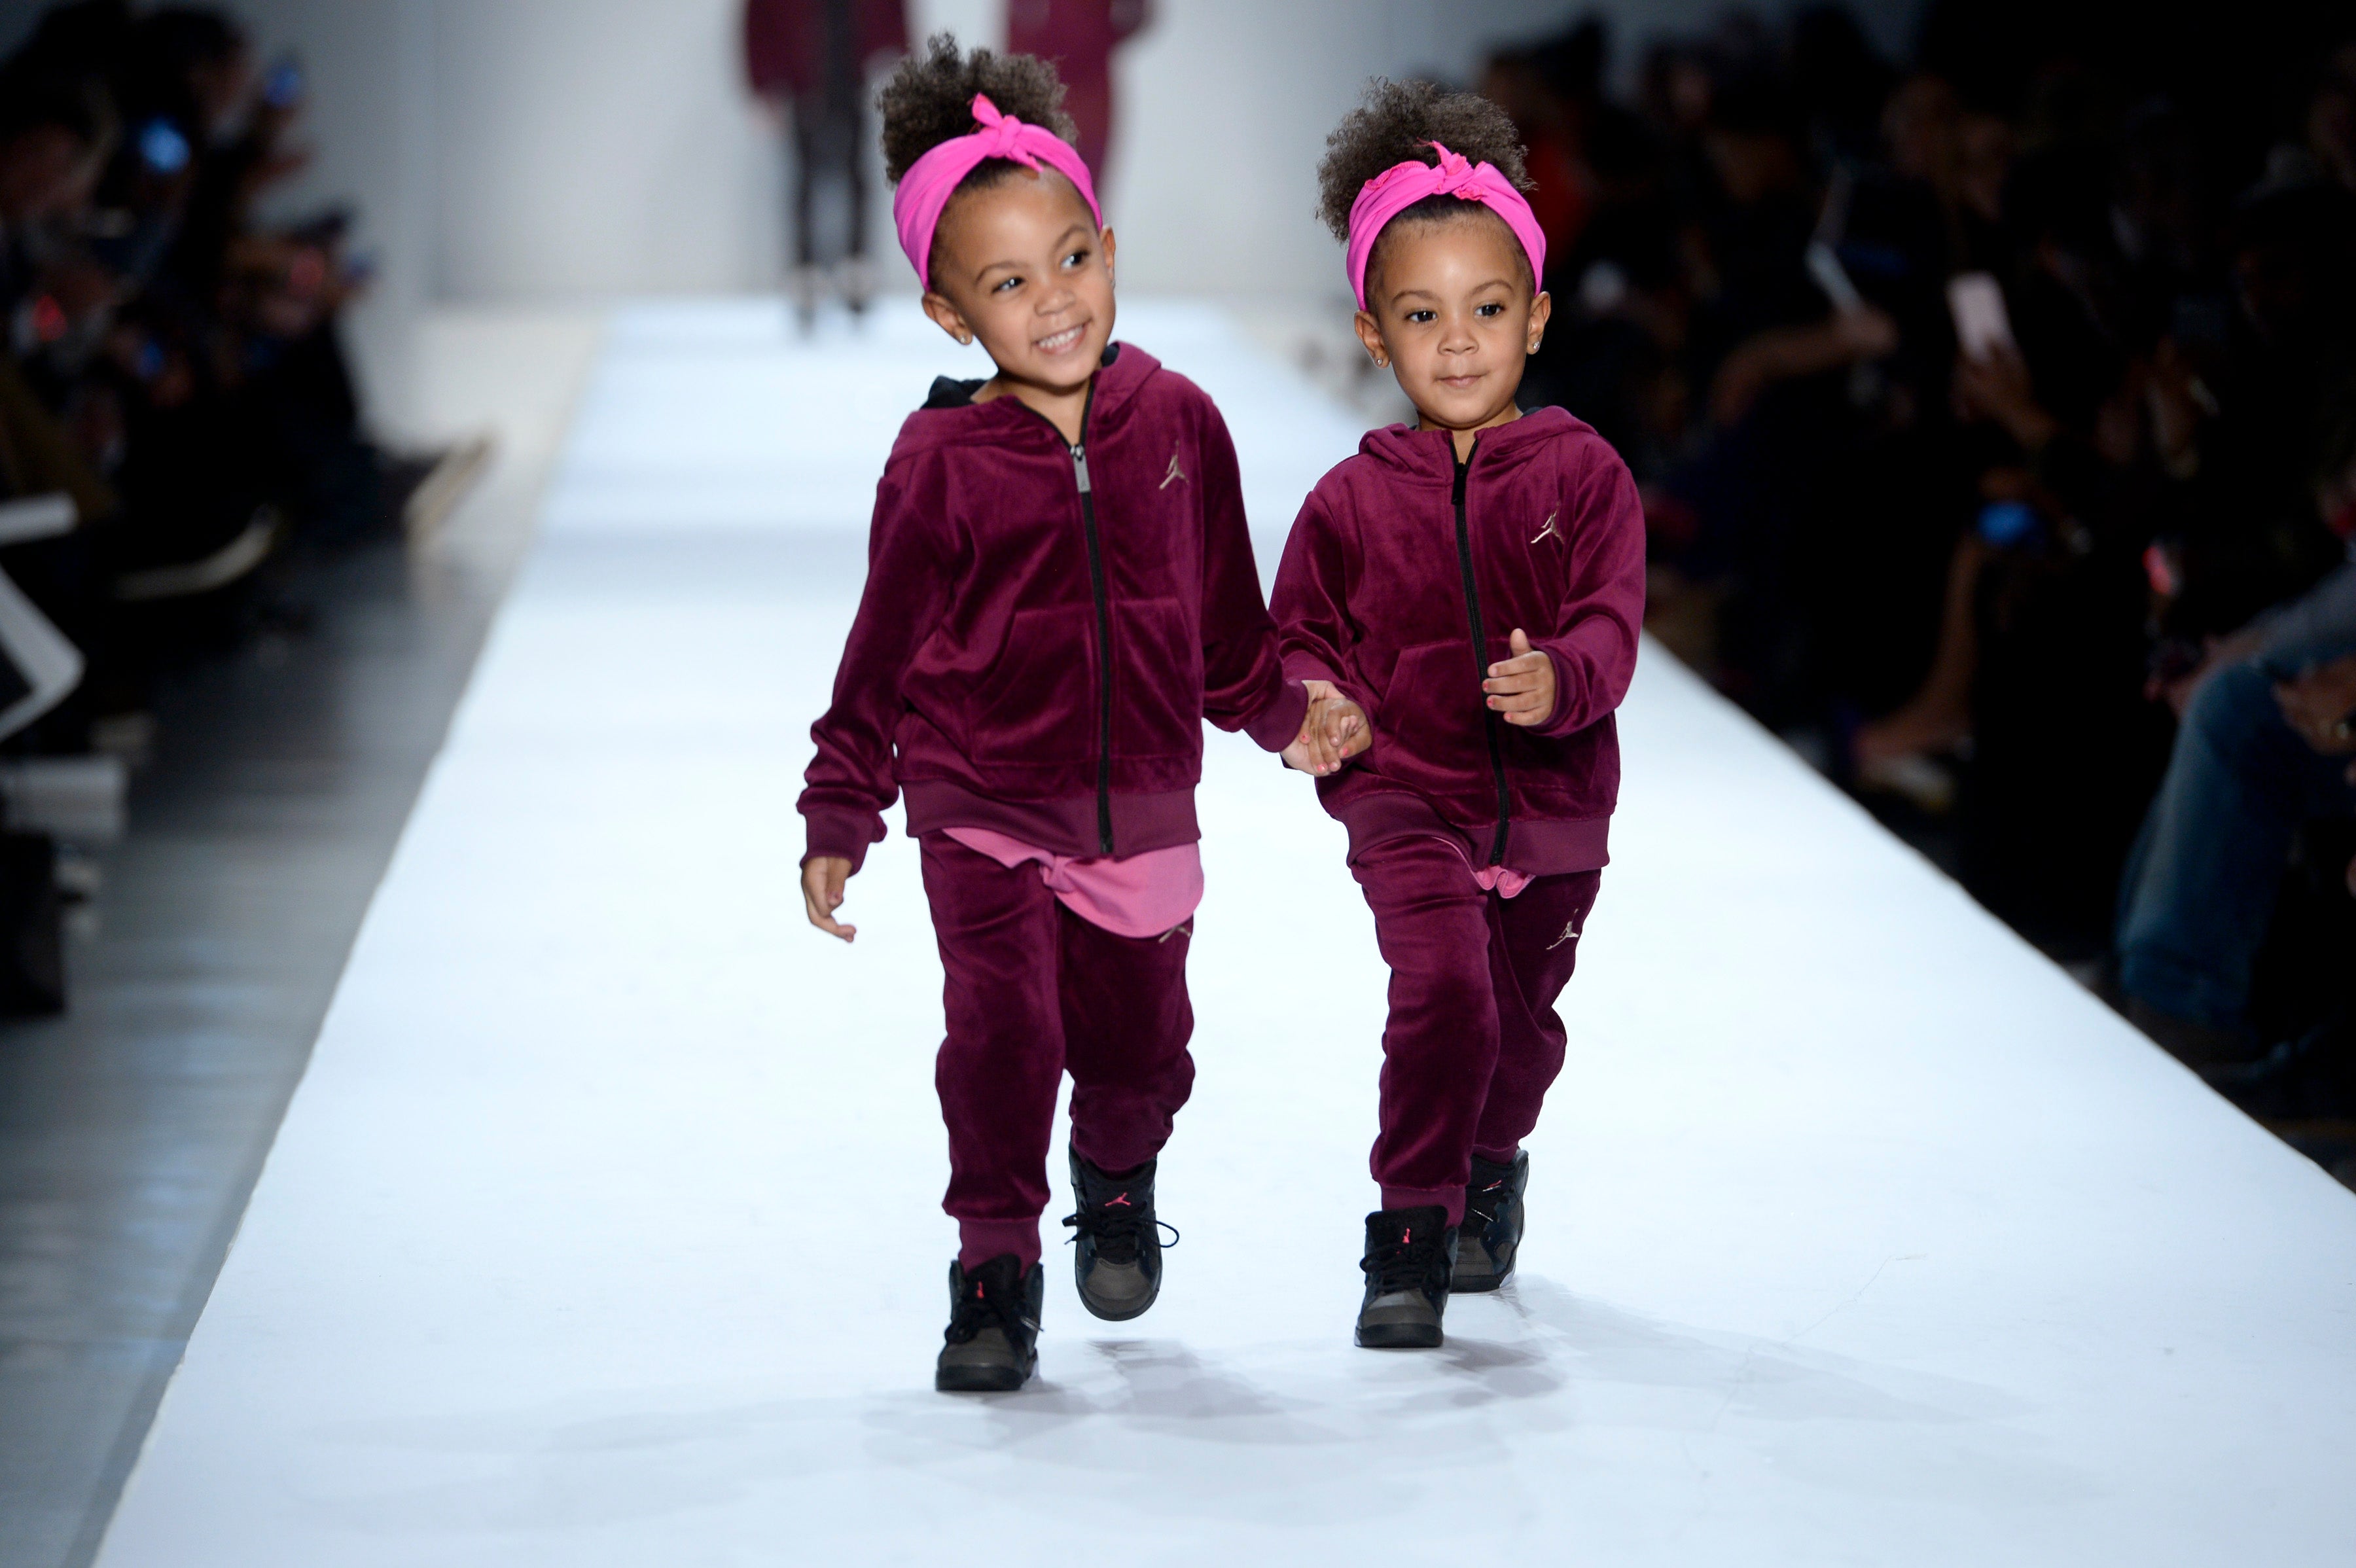 The Always Adorable McClure Twins Make Their Fashion Week Debut
